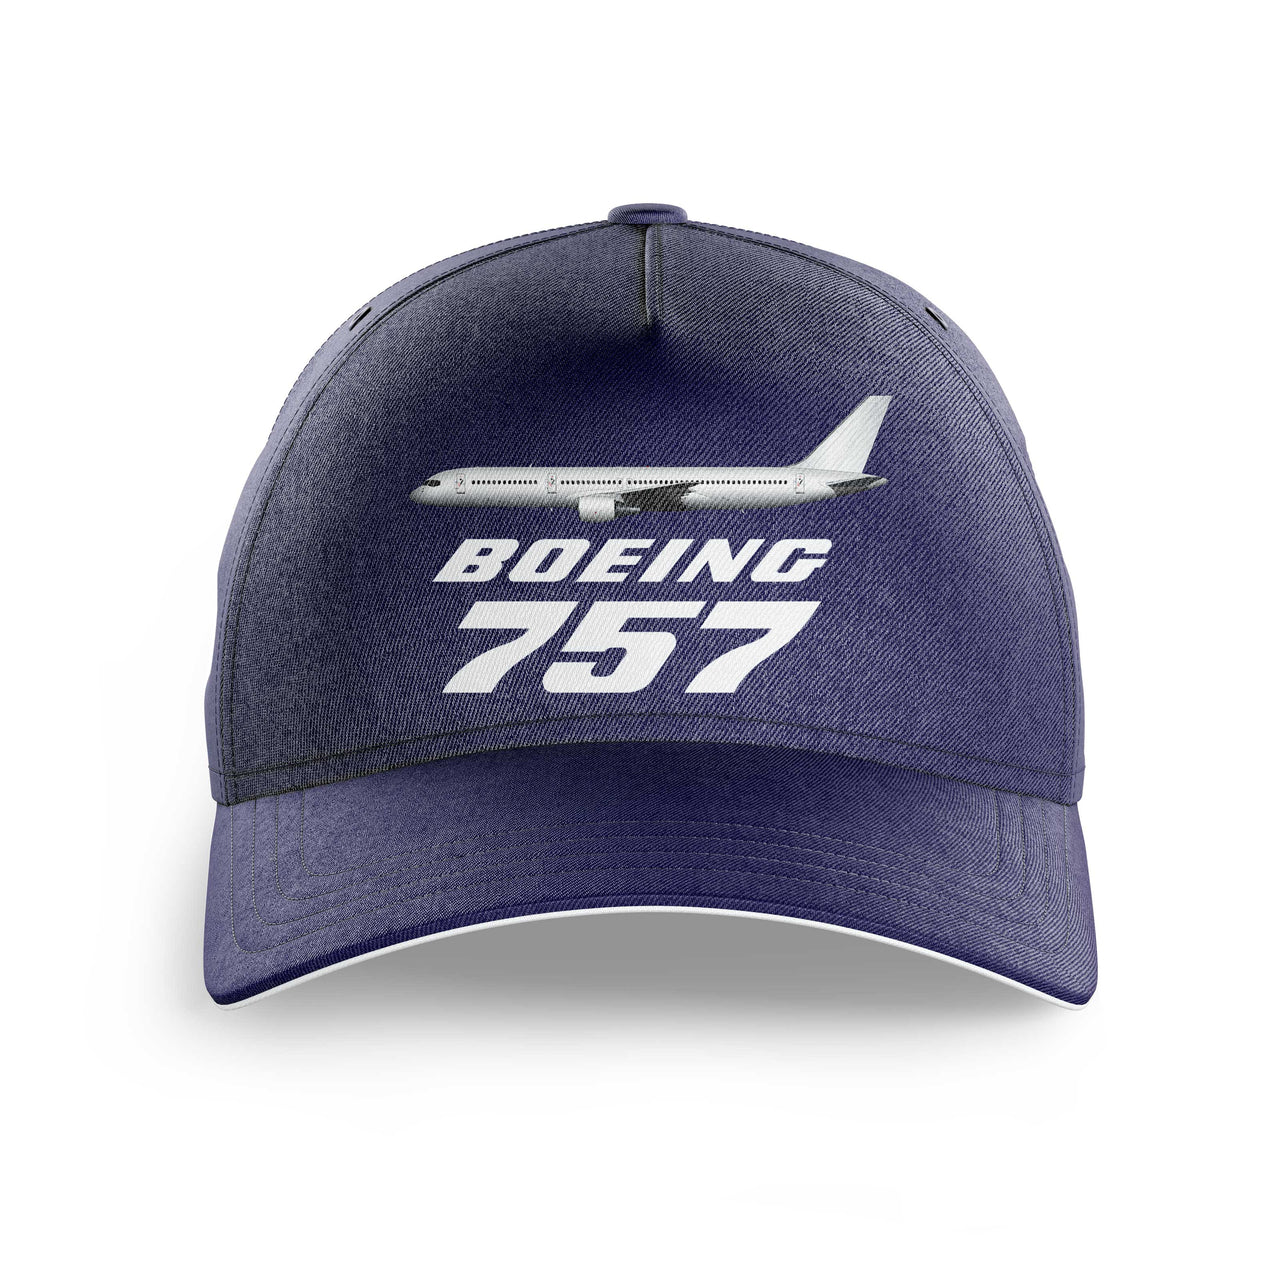 The Boeing 757 Printed Hats